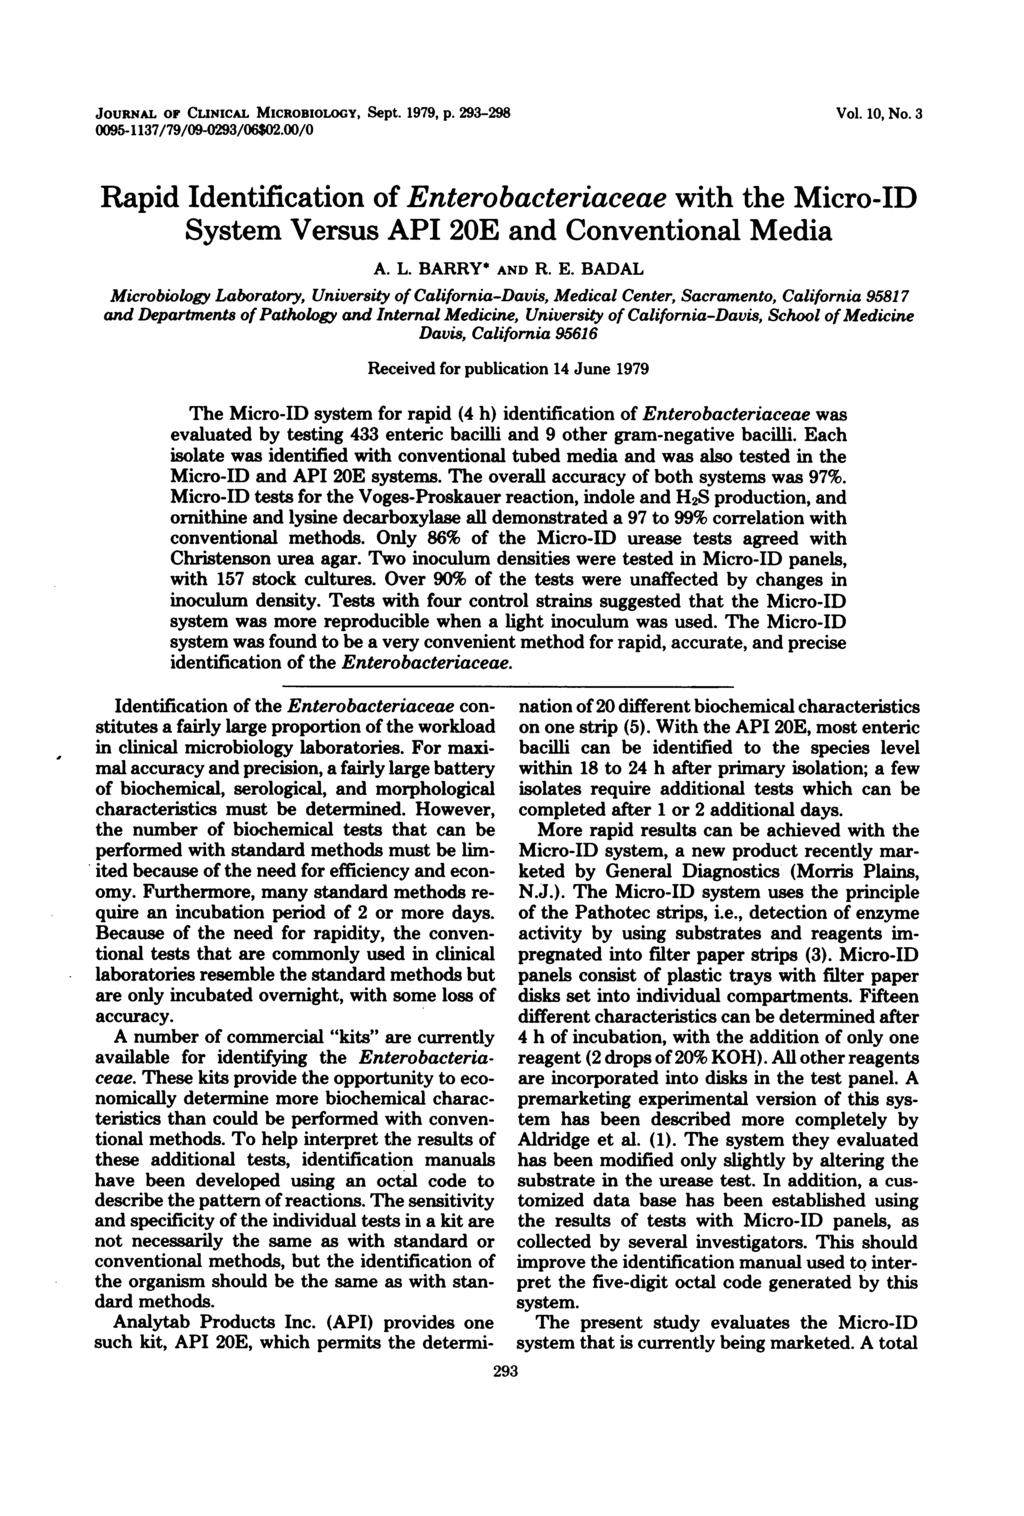 JOURNAL OF CLINICAL MICROBIOLOGY, Sept. 1979, p. 293-298 0095-1137/79/09-0293/06$02.00/0 Vol. 10, No.